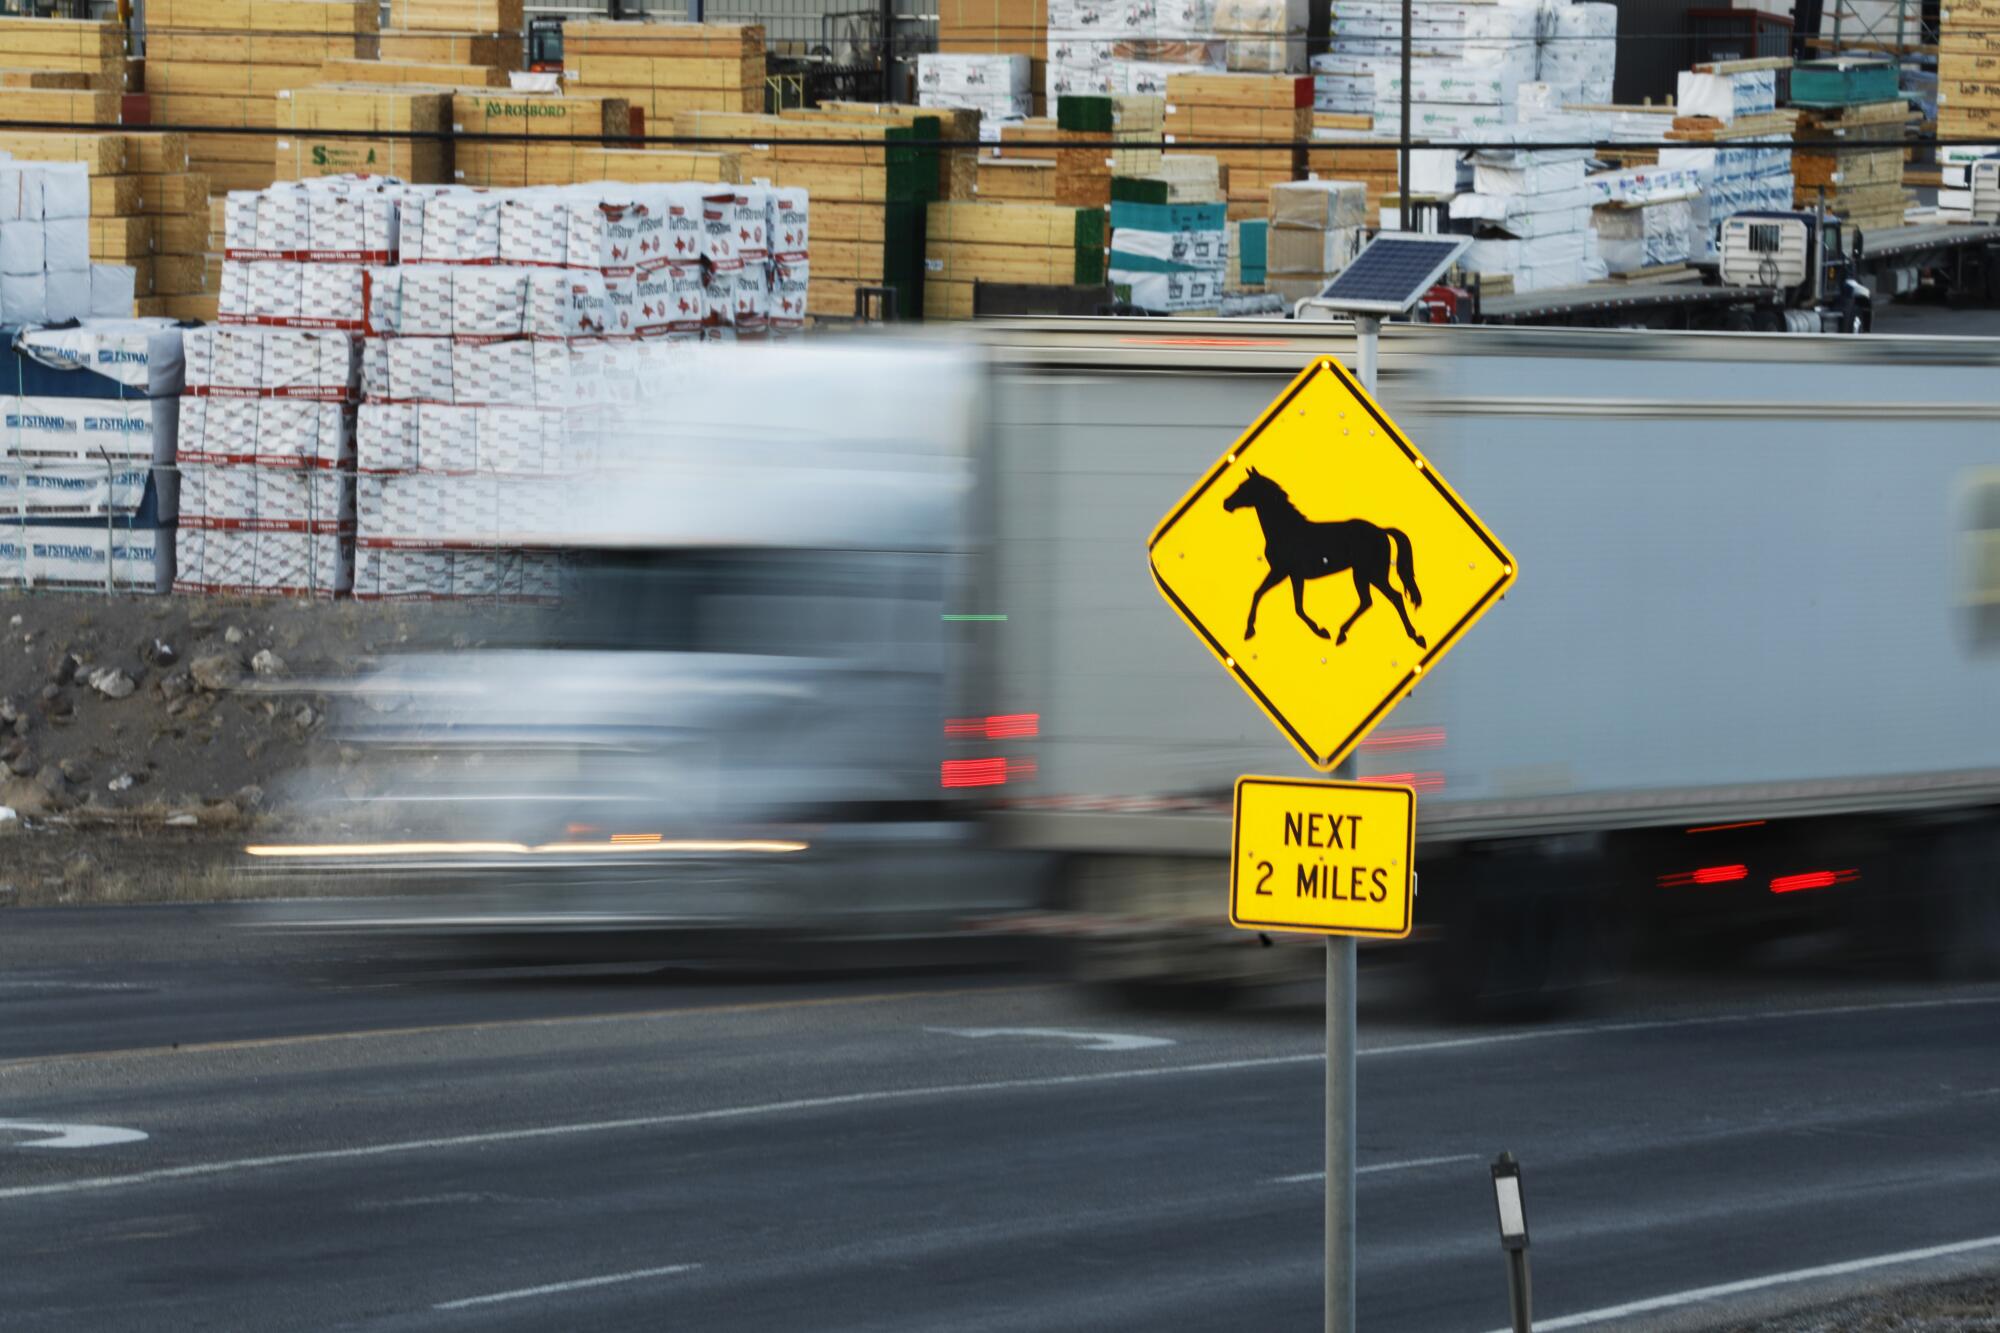 A sign warns of horses: "Next 2 miles."